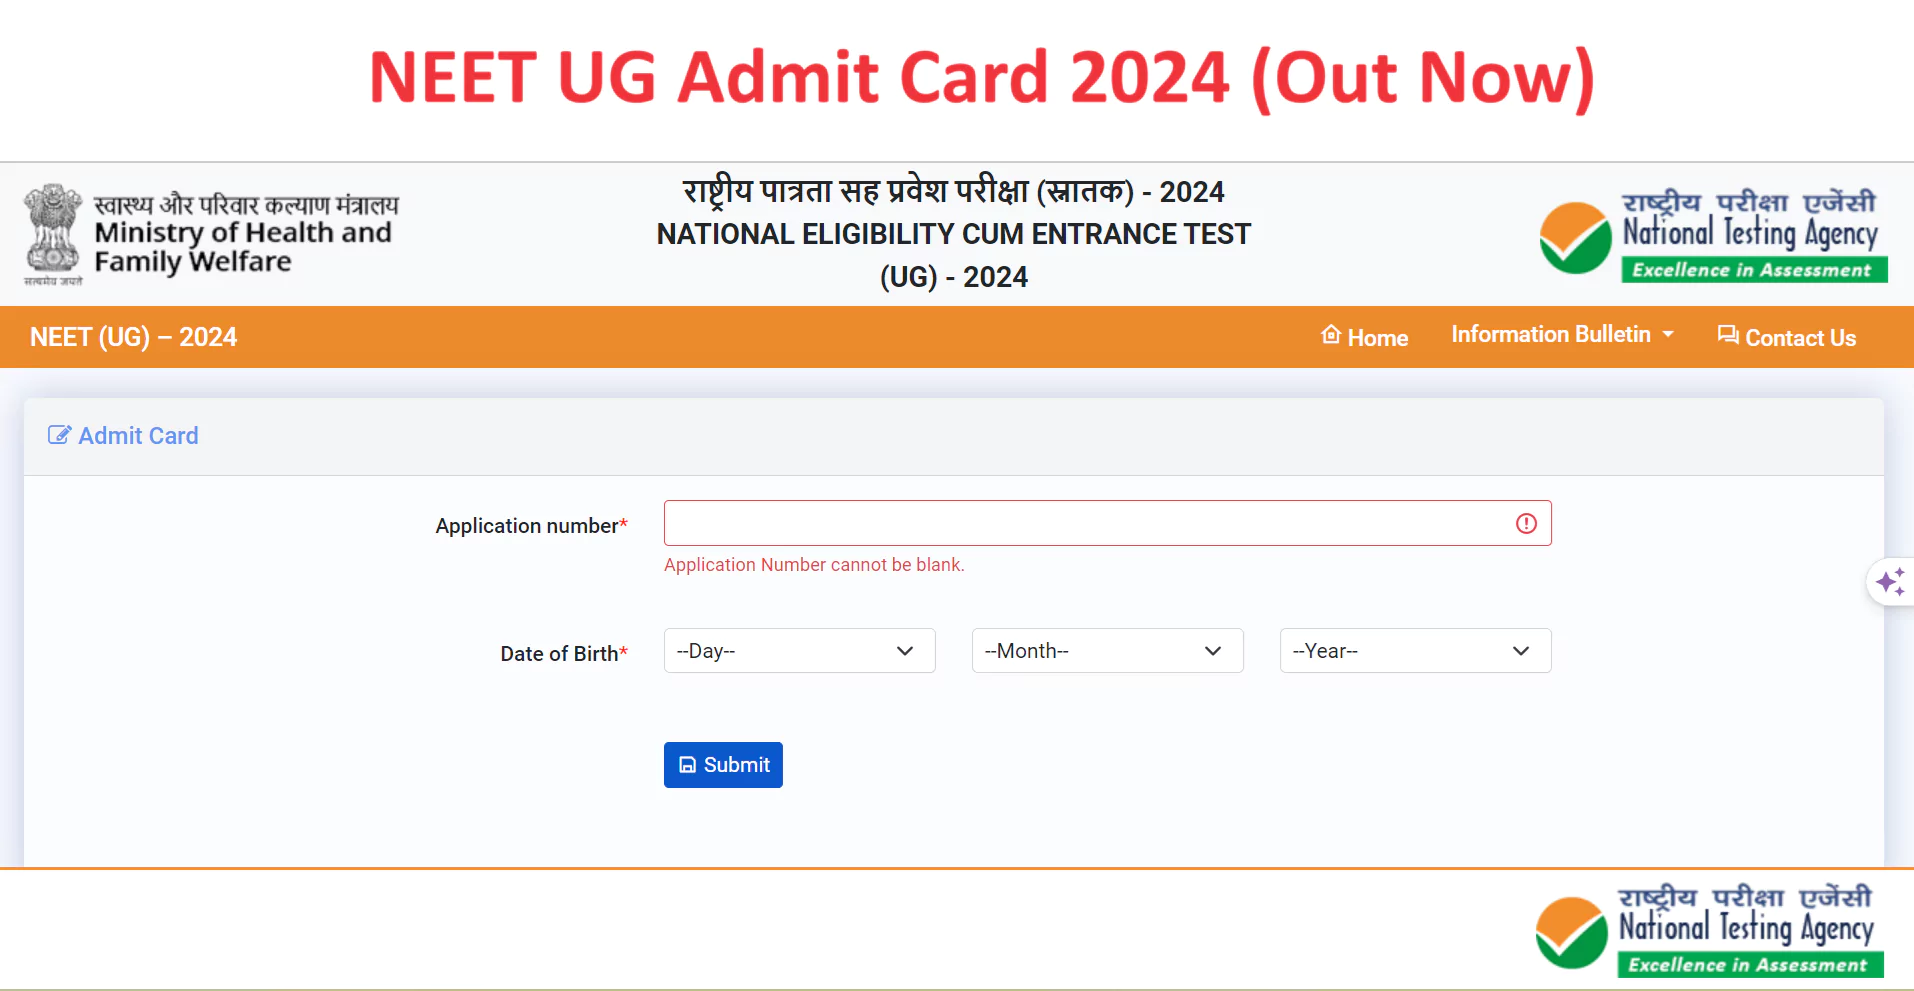 NEET UG Admit Card 2024 (Out Now)